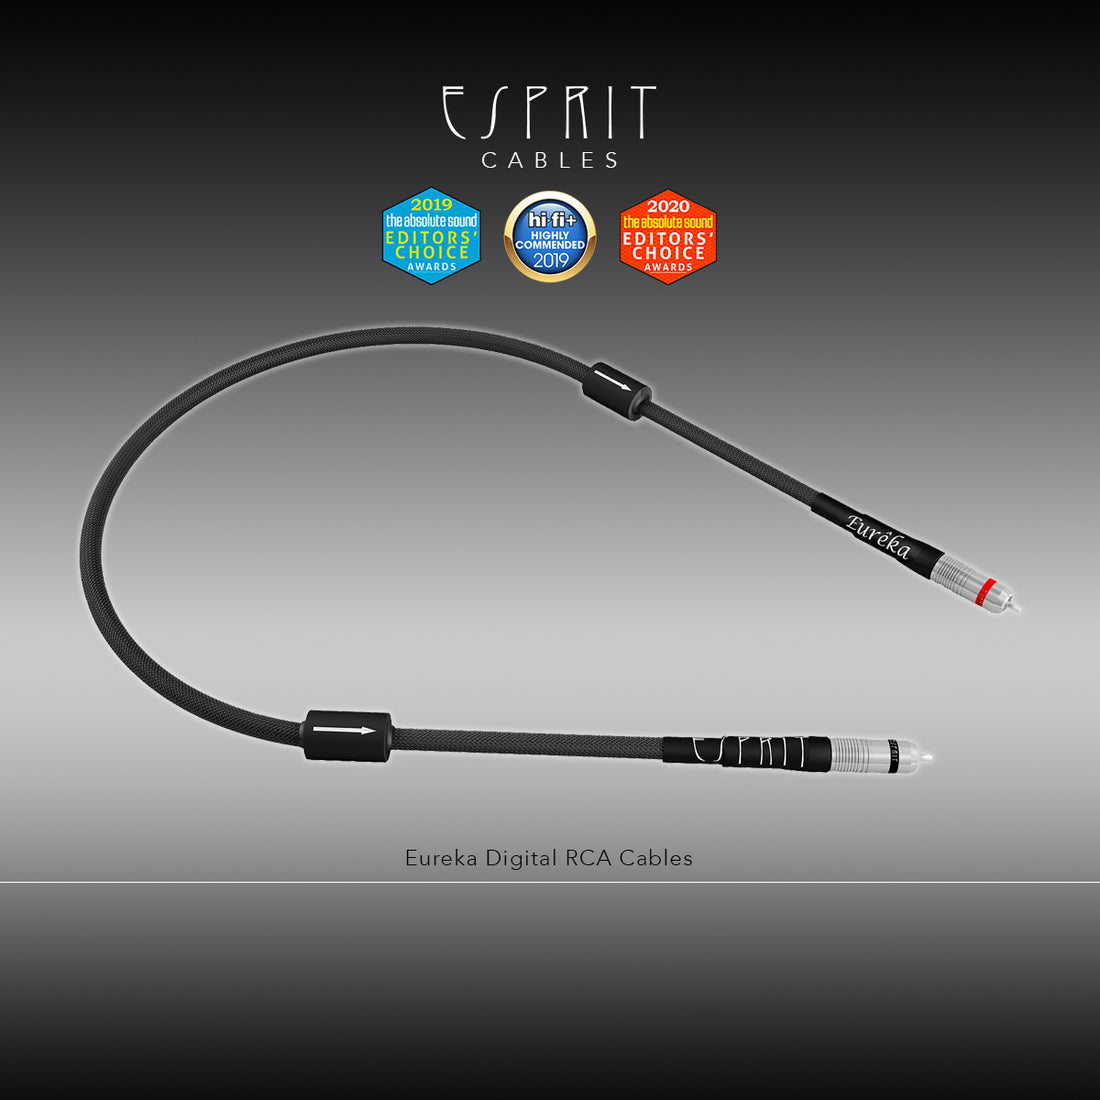 What makes Espirit cables so special?